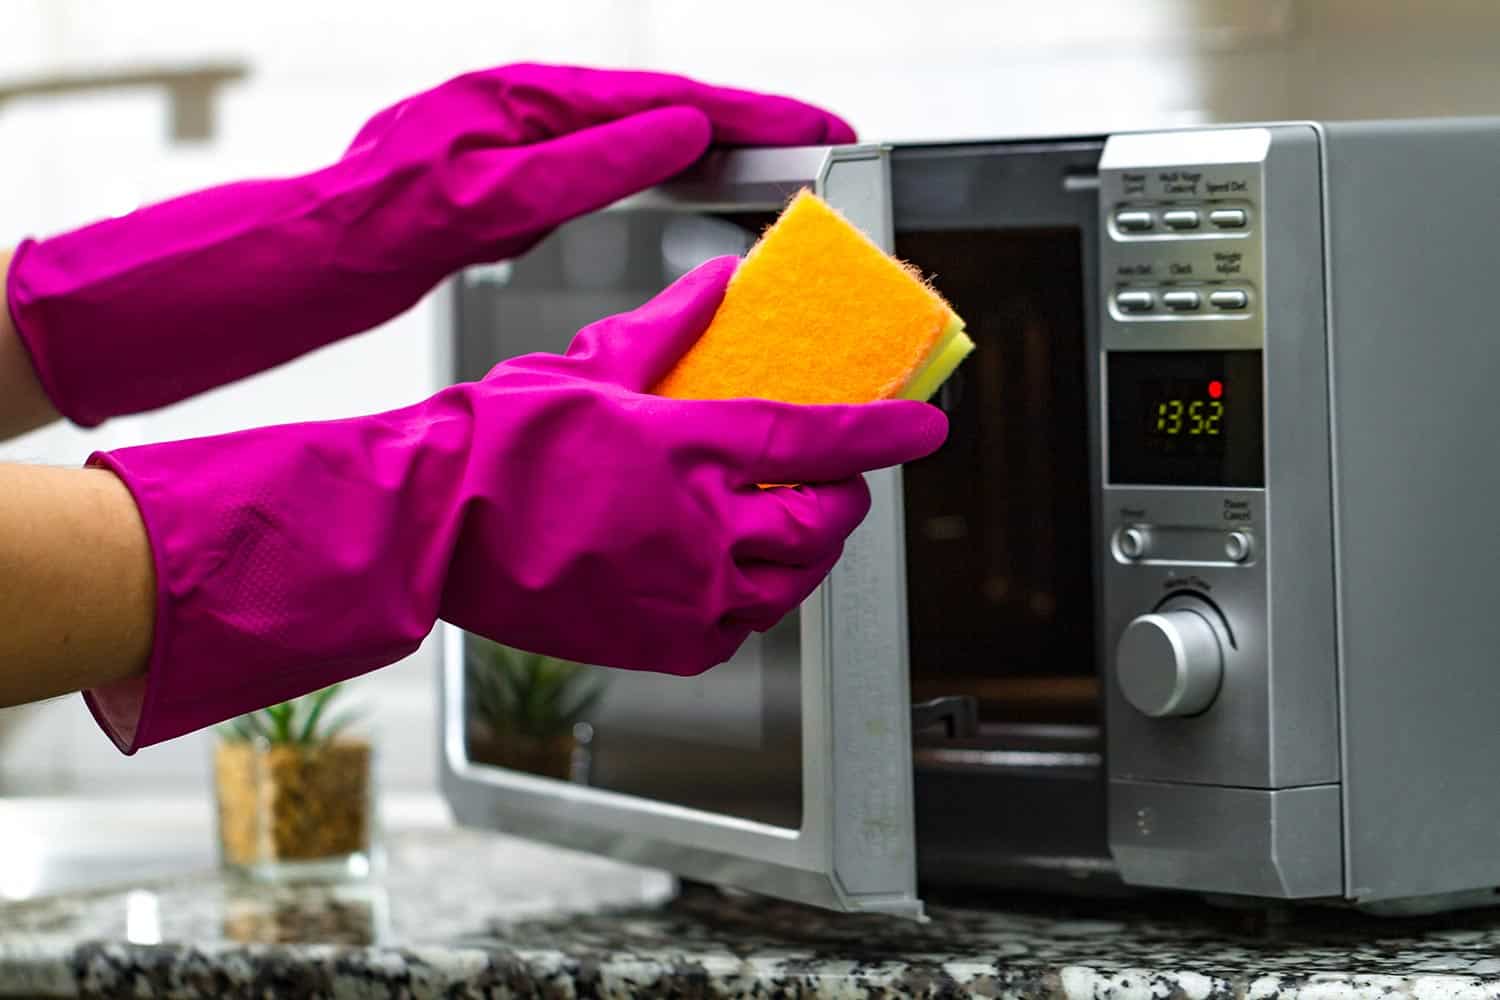 Housewife's hand in rubber gloves cleans the microwave using a sponge